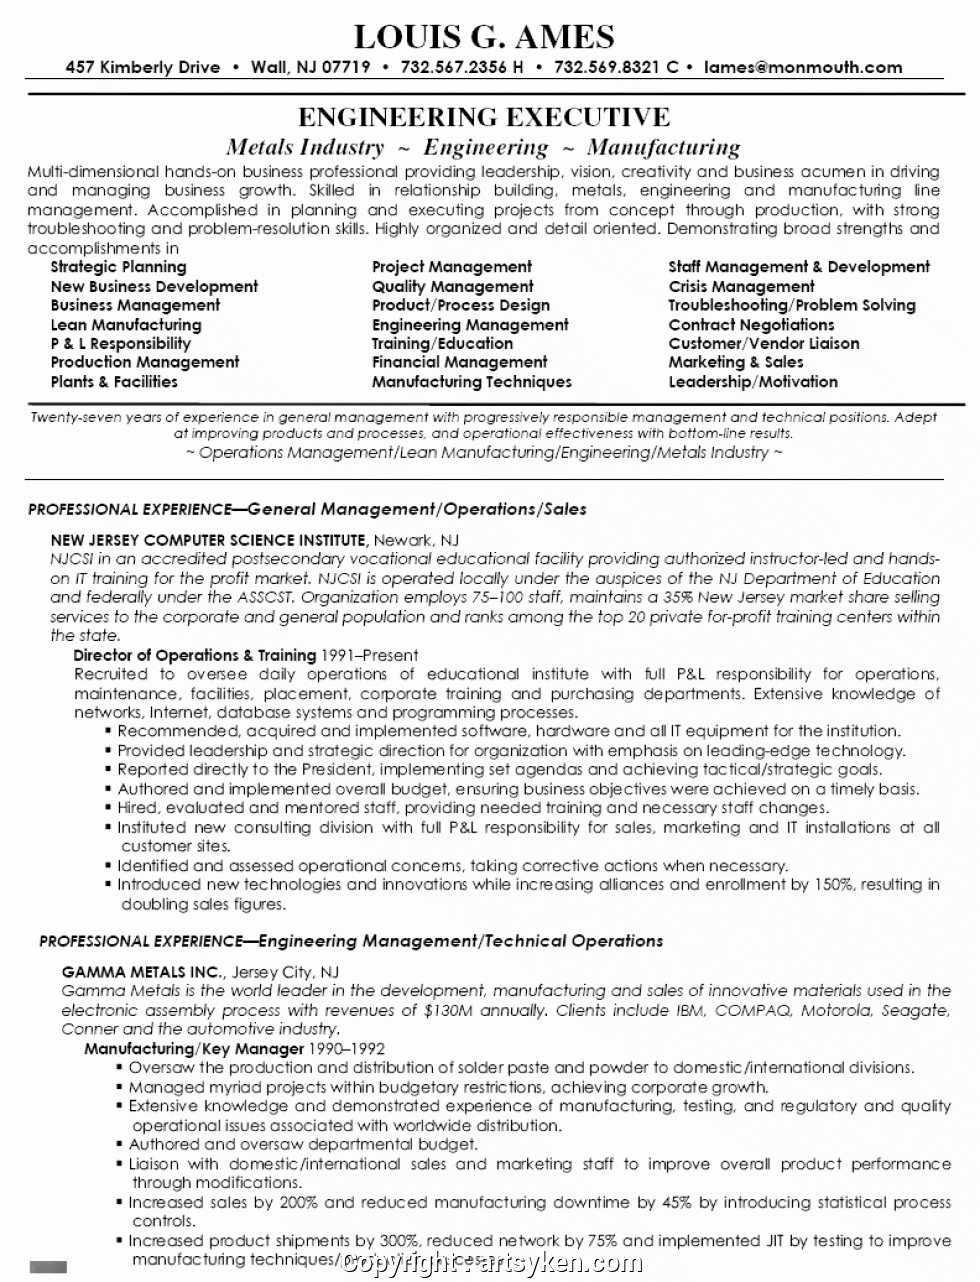 Free Operations Management Sample Resume Controller Resume